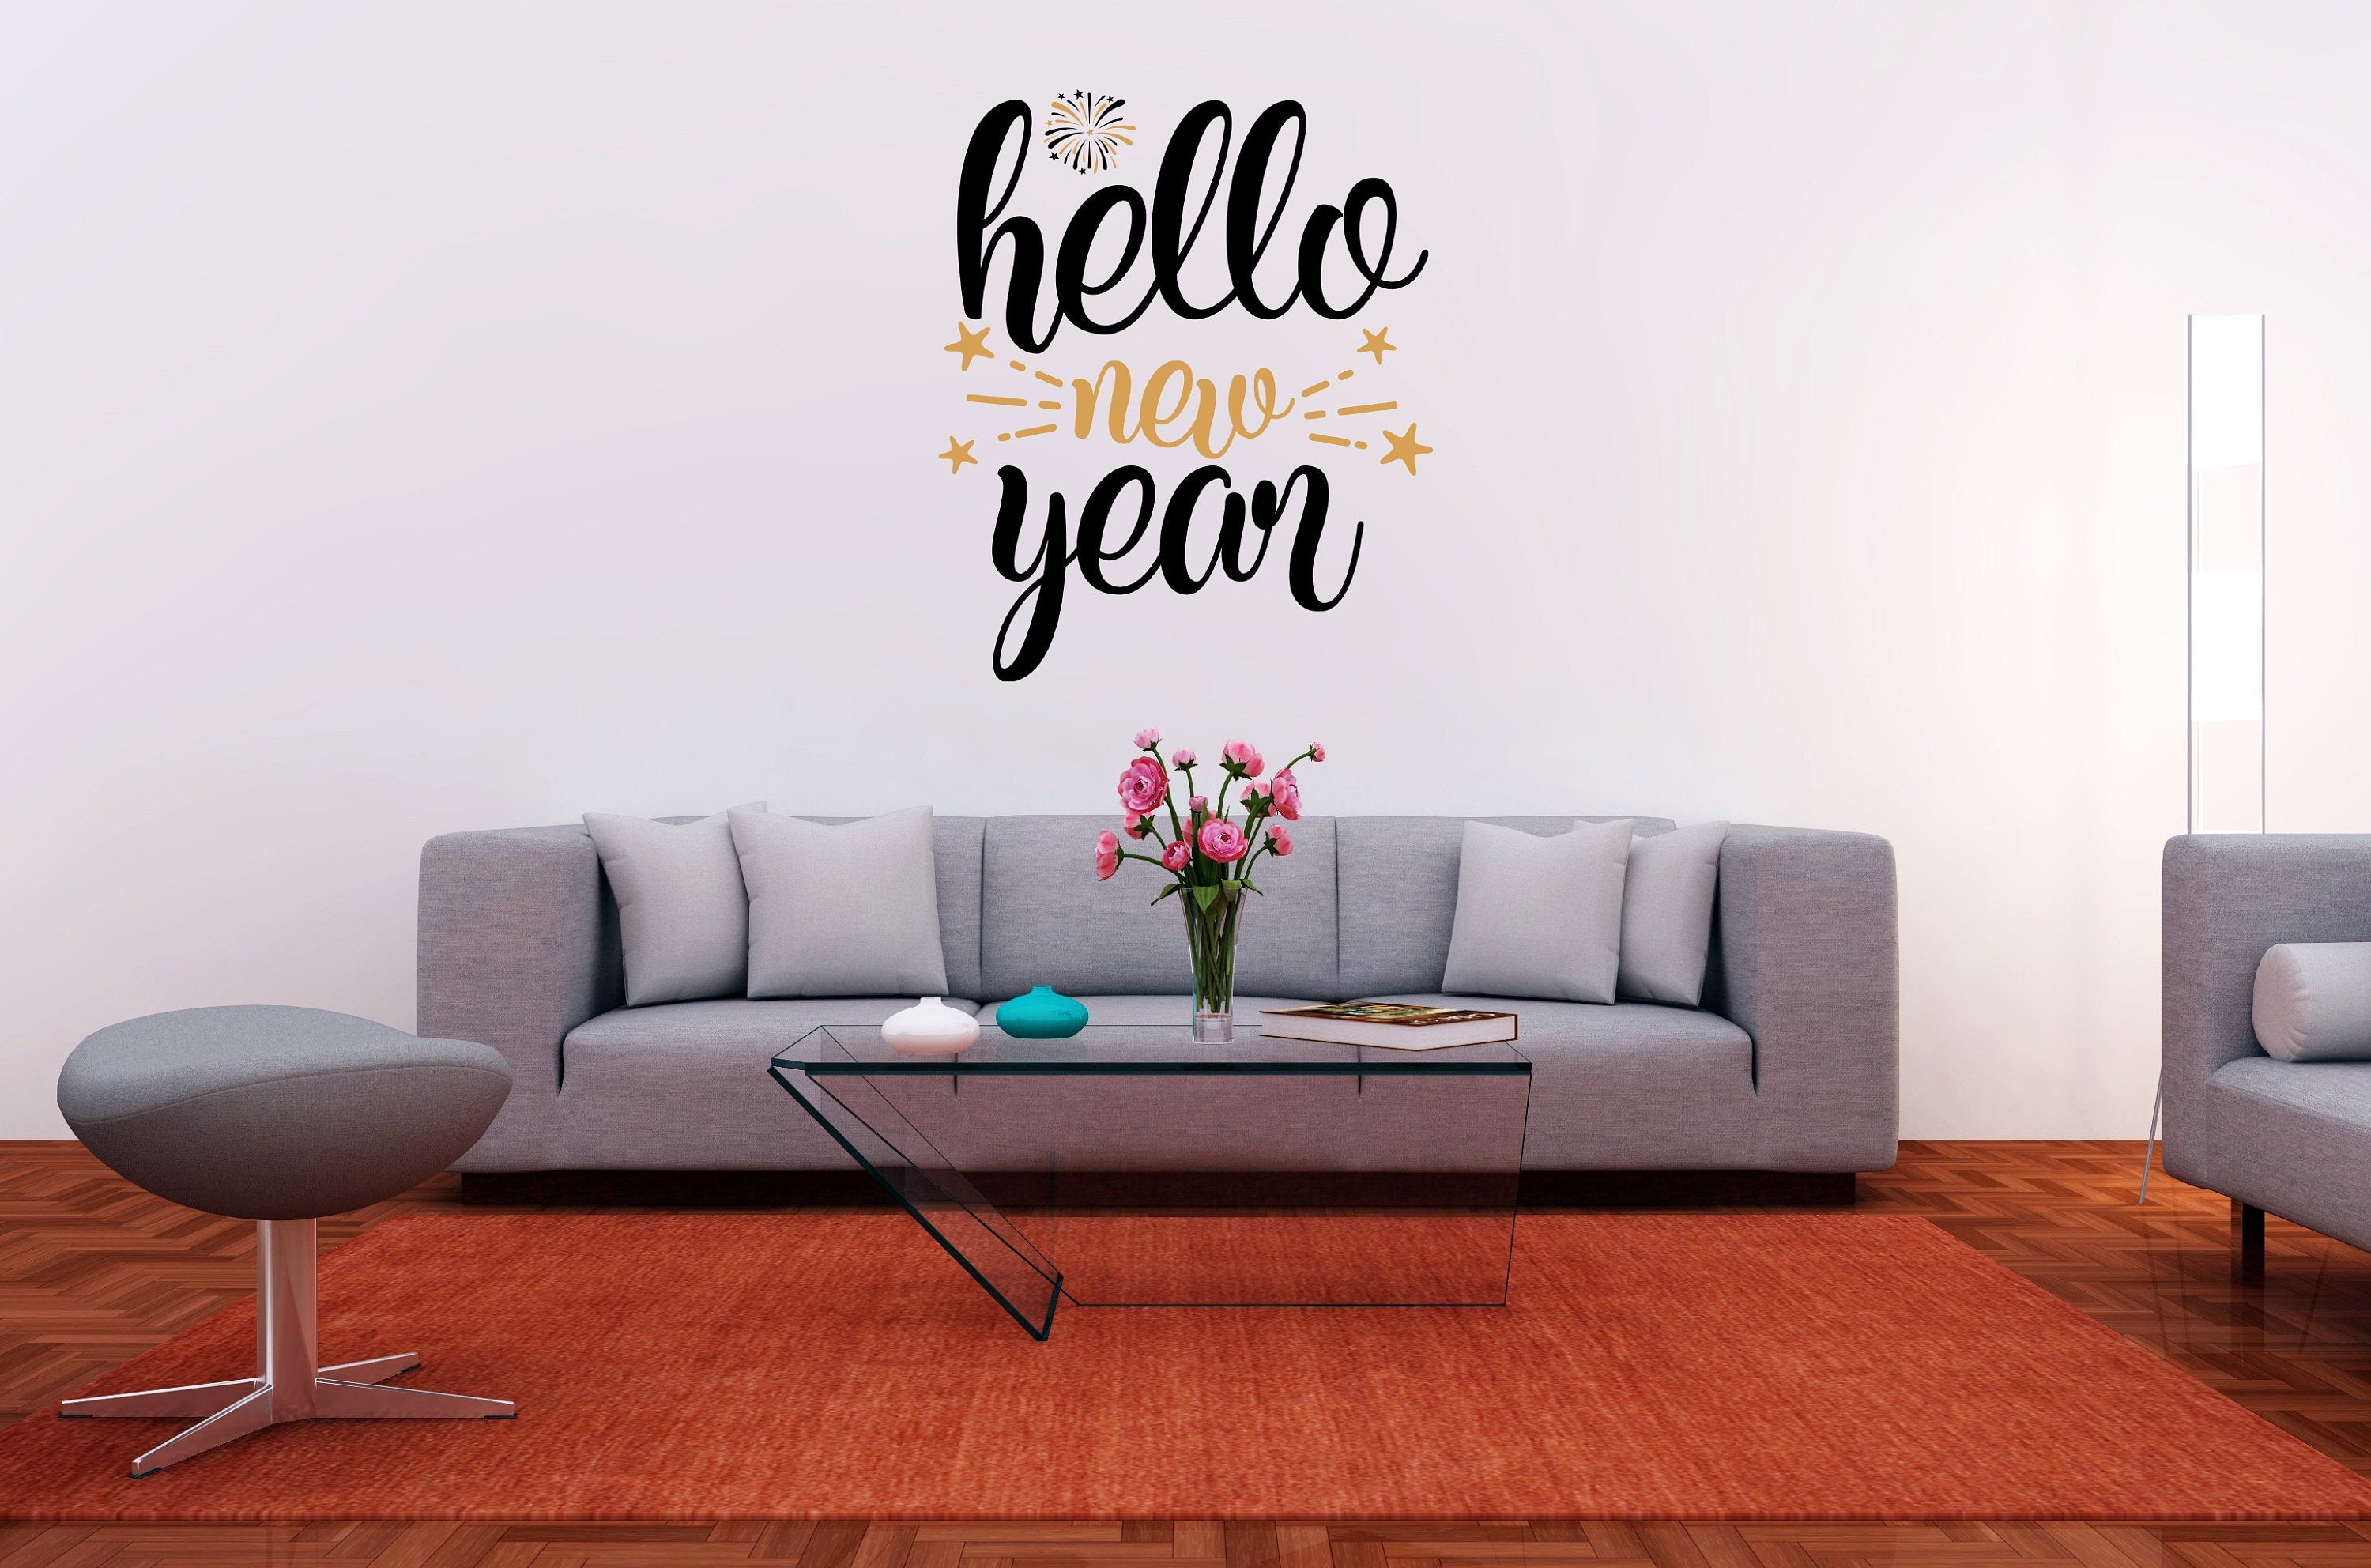 Hello New Year Vinyl Decal for DIY Signs, Walls, Wood, Metal, New Year's Eve Party & Event Decor, Gift,